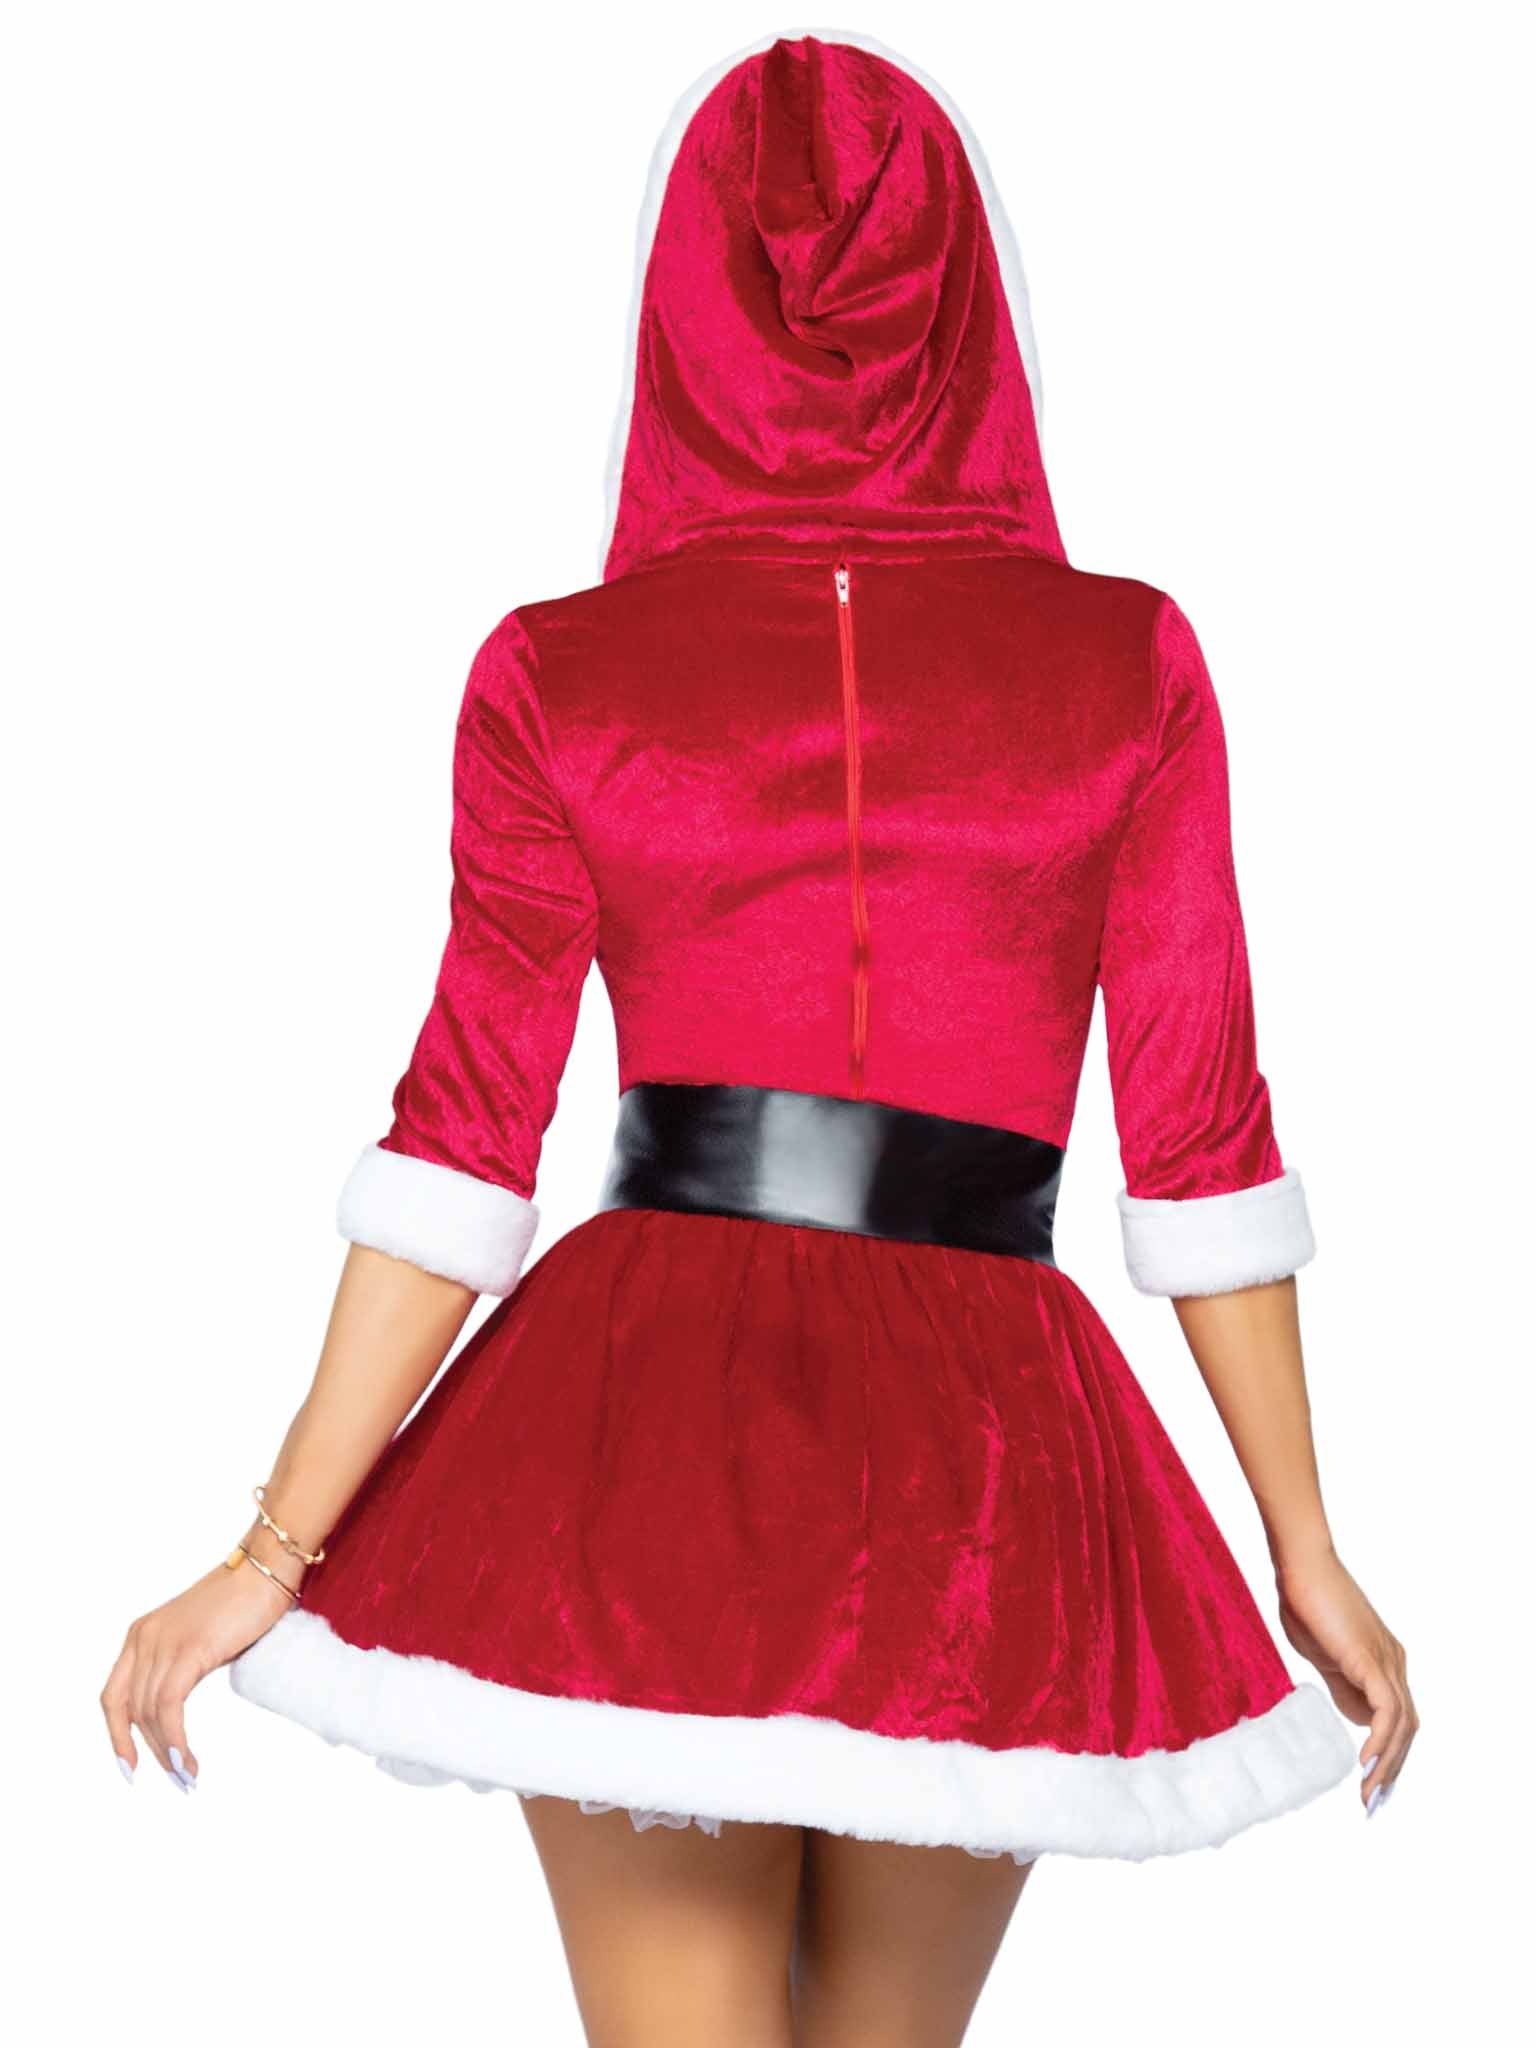 Mrs. Claus Hooded Dress